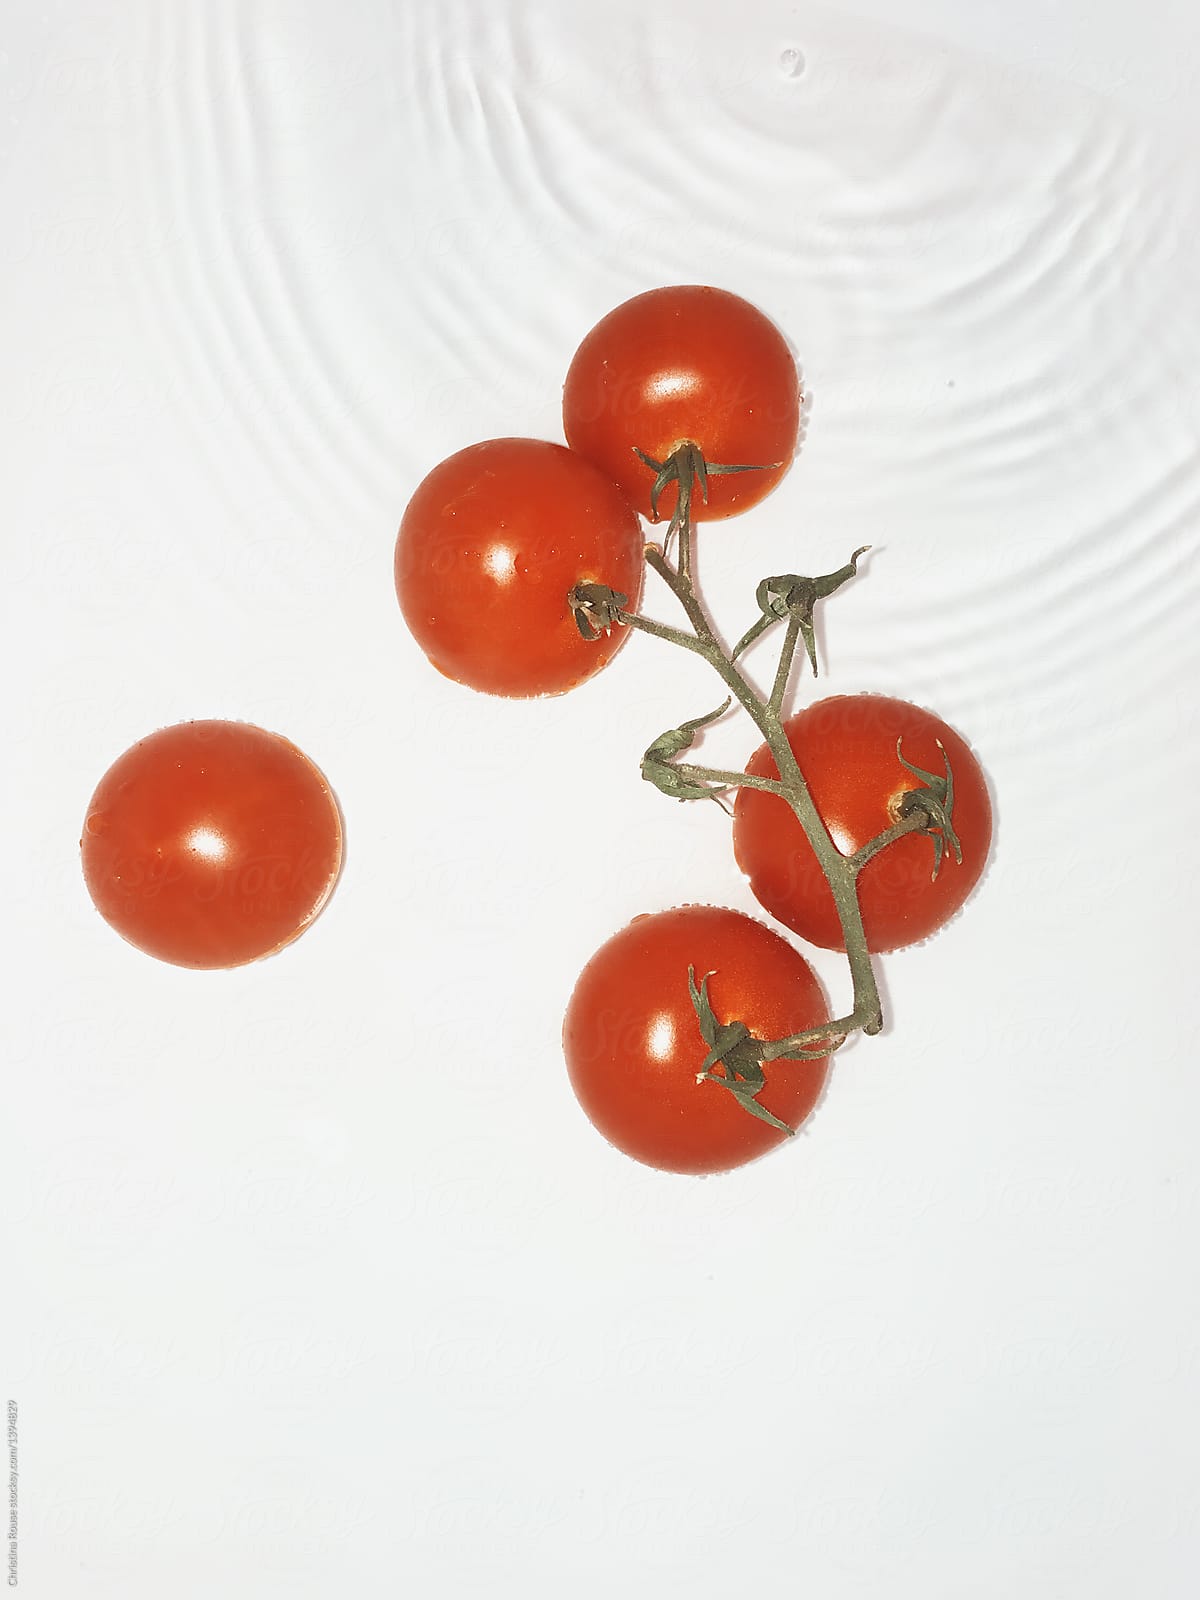 Ripe tomatoes on the vine floating in water